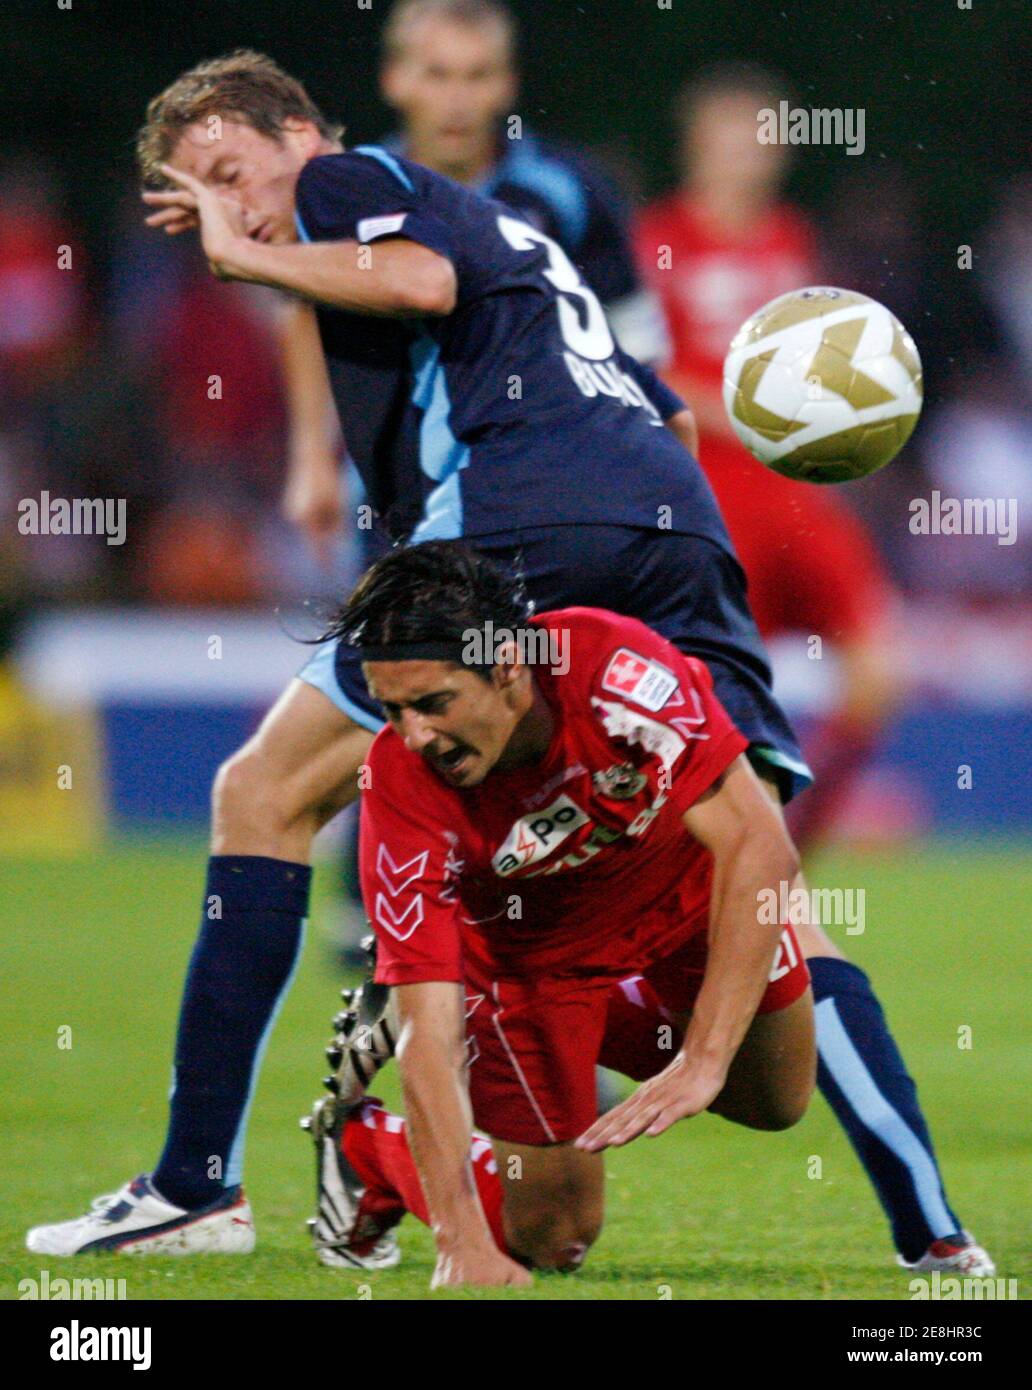 FC Thun's Nelson Ferreira (front) challenges FC Sion's Arnaud Buehler during their Swiss Super League soccer match in Thun August 7, 2007. REUTERS/Pascal Lauener (SWITZERLAND) Stock Photo